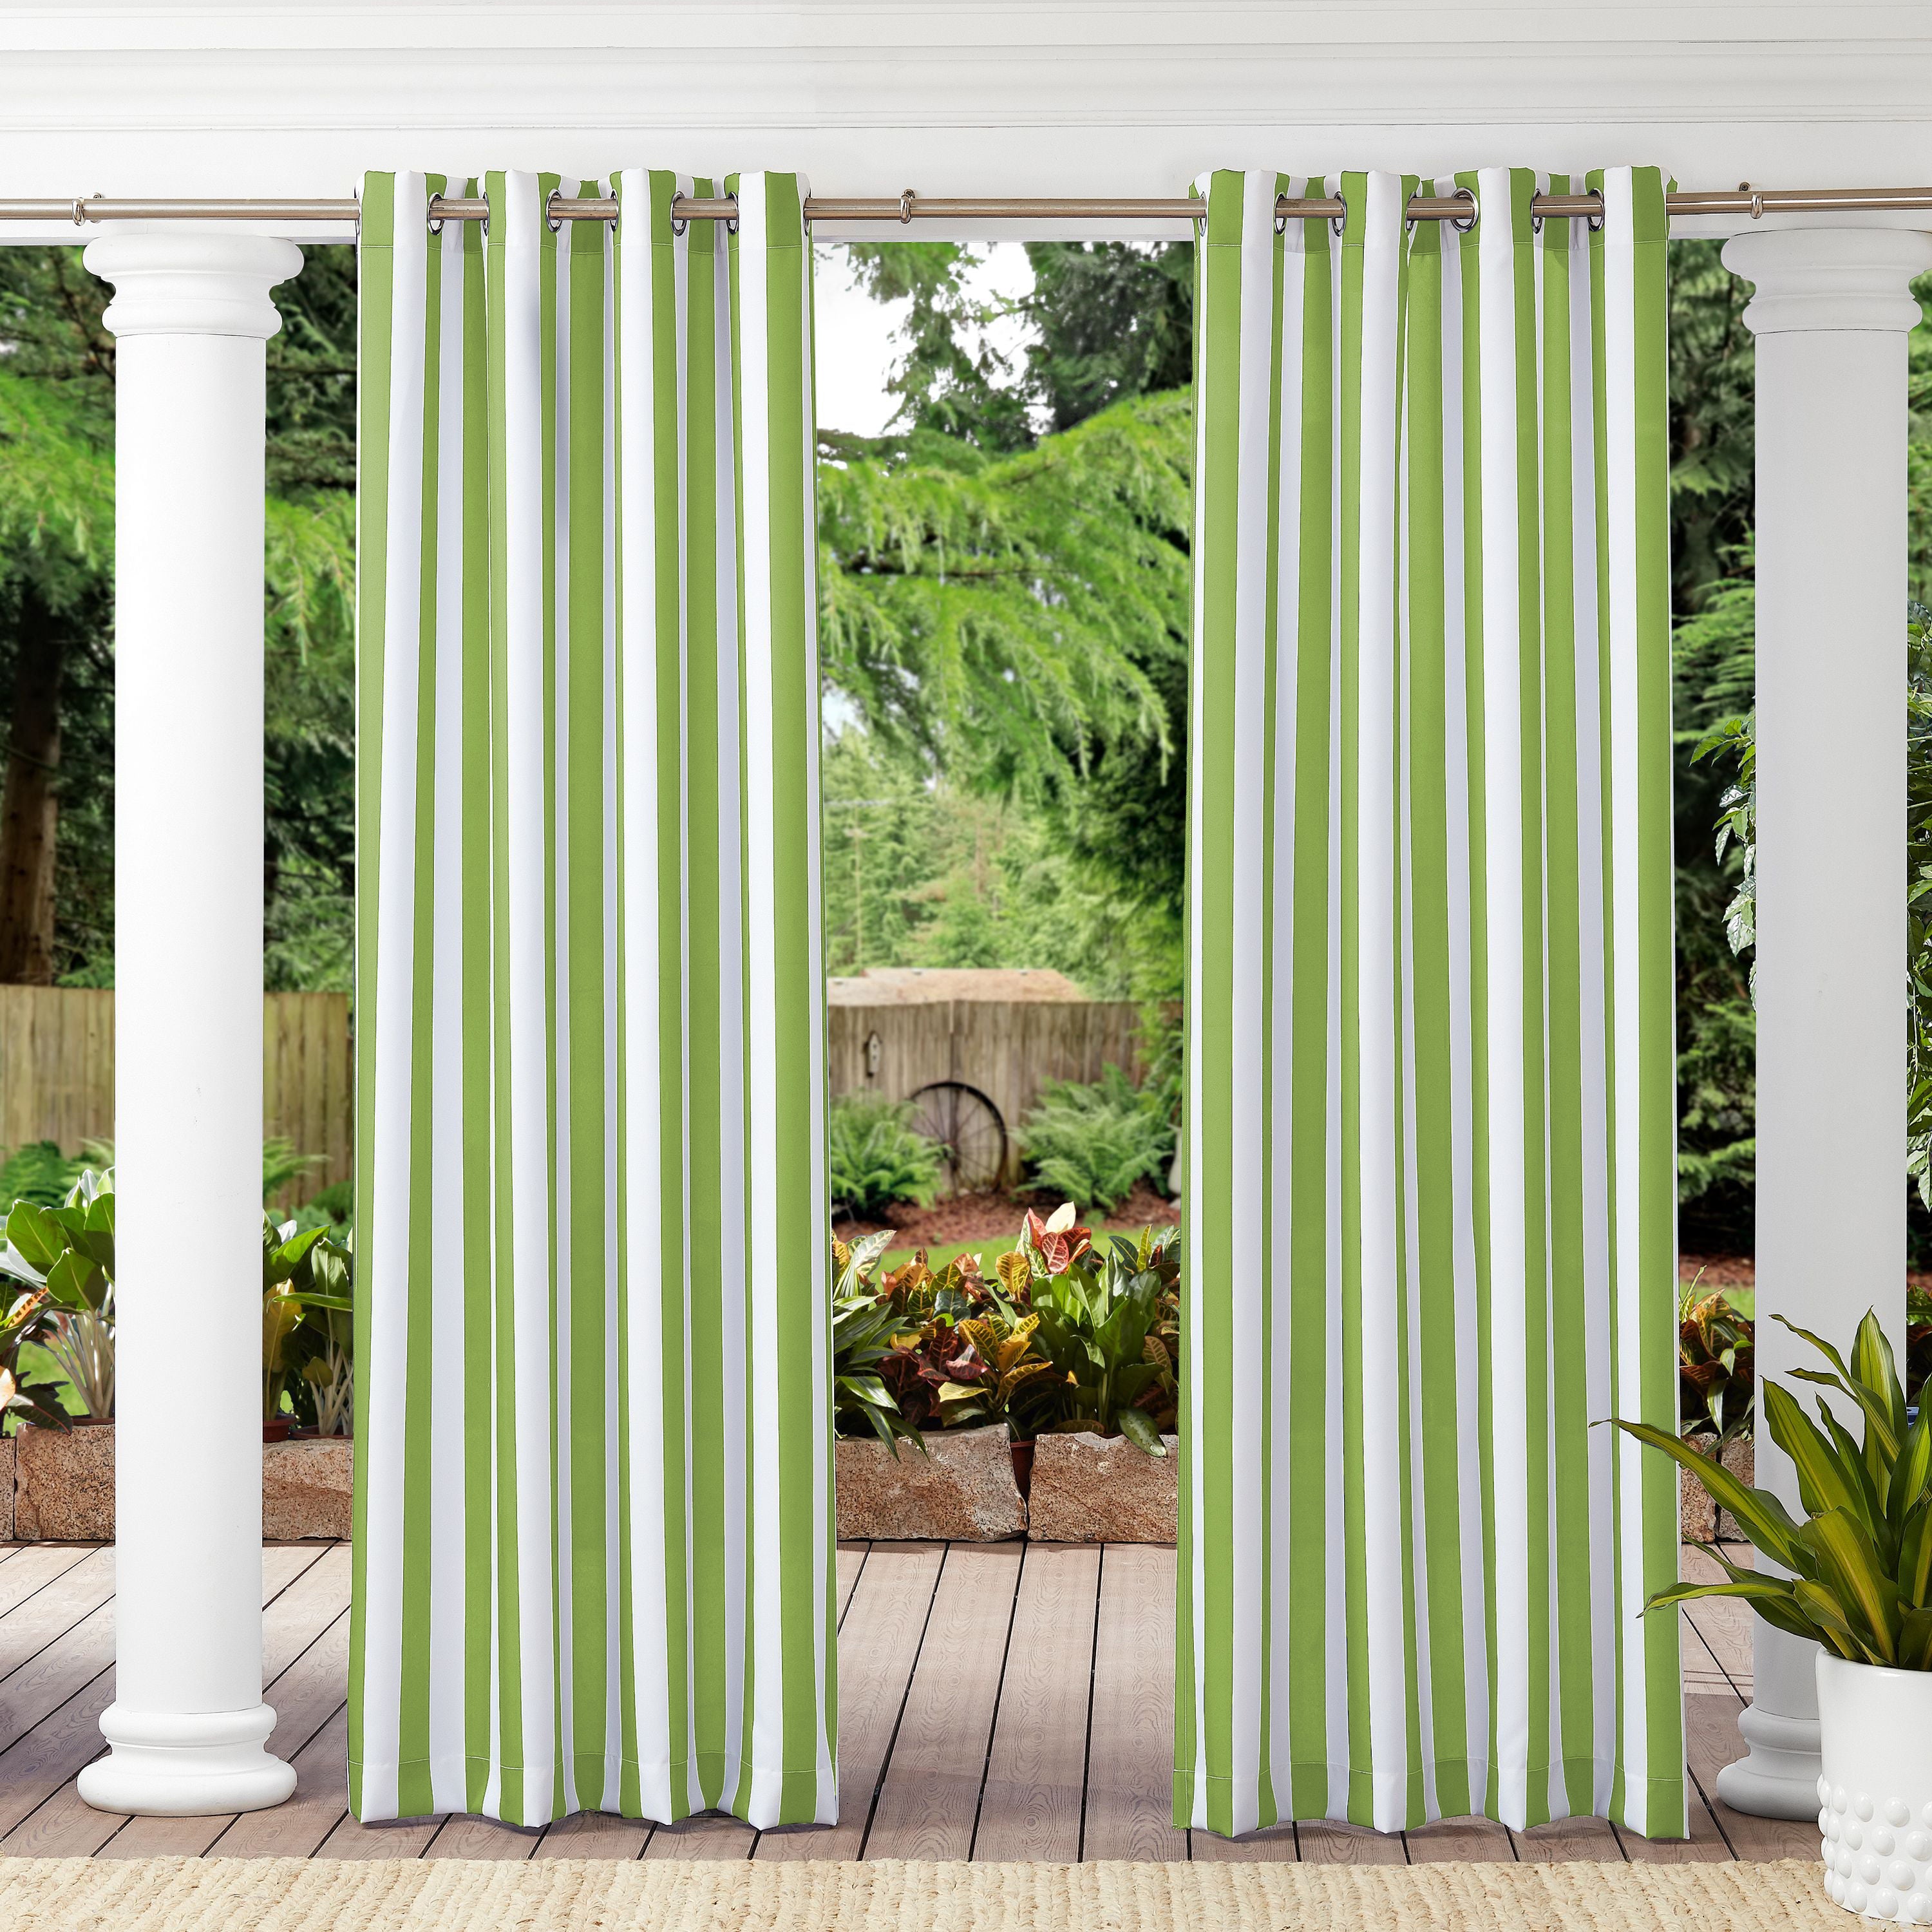 Fadenomore Grommet Top Windproof and Waterproof Striped Outdoor Curtains, 1 Panel